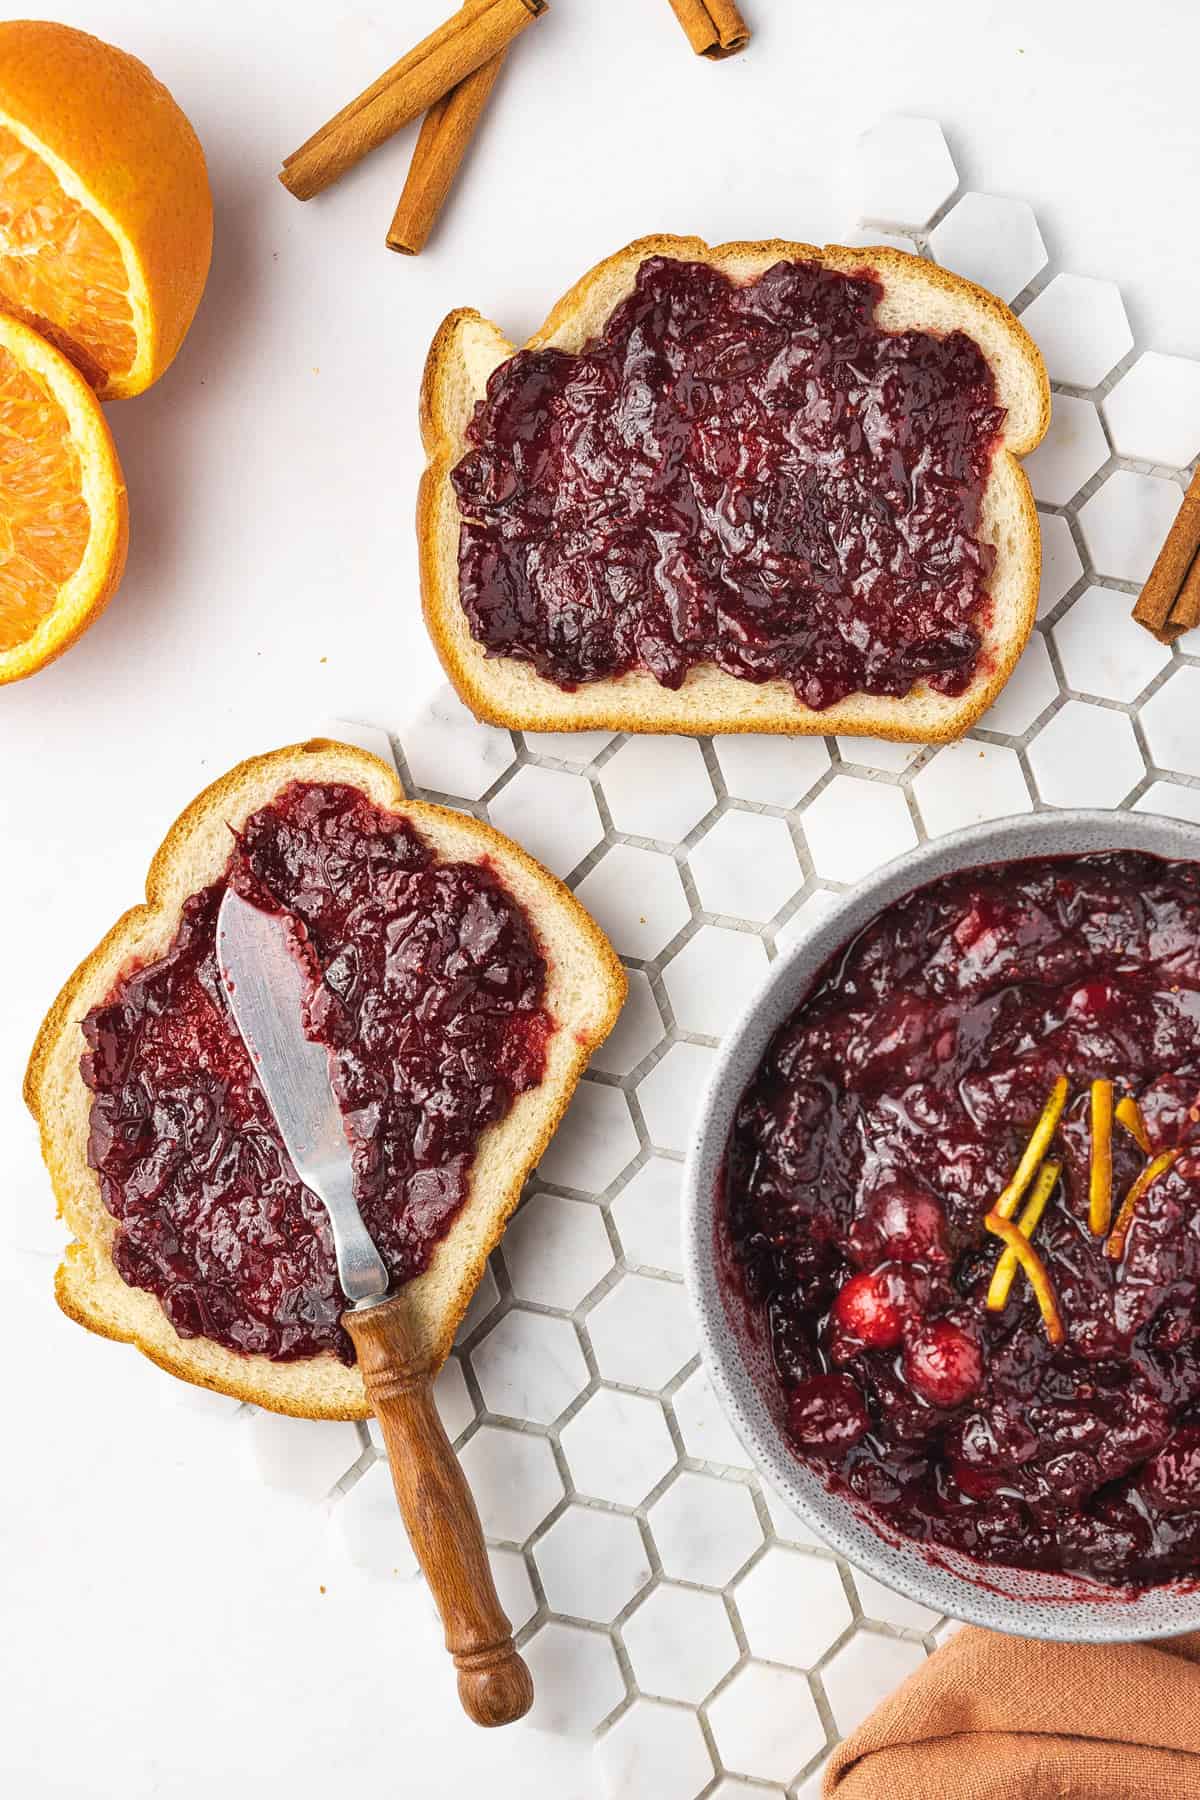 Overhead view of two slices of bread with cranberry sauce spread on them.